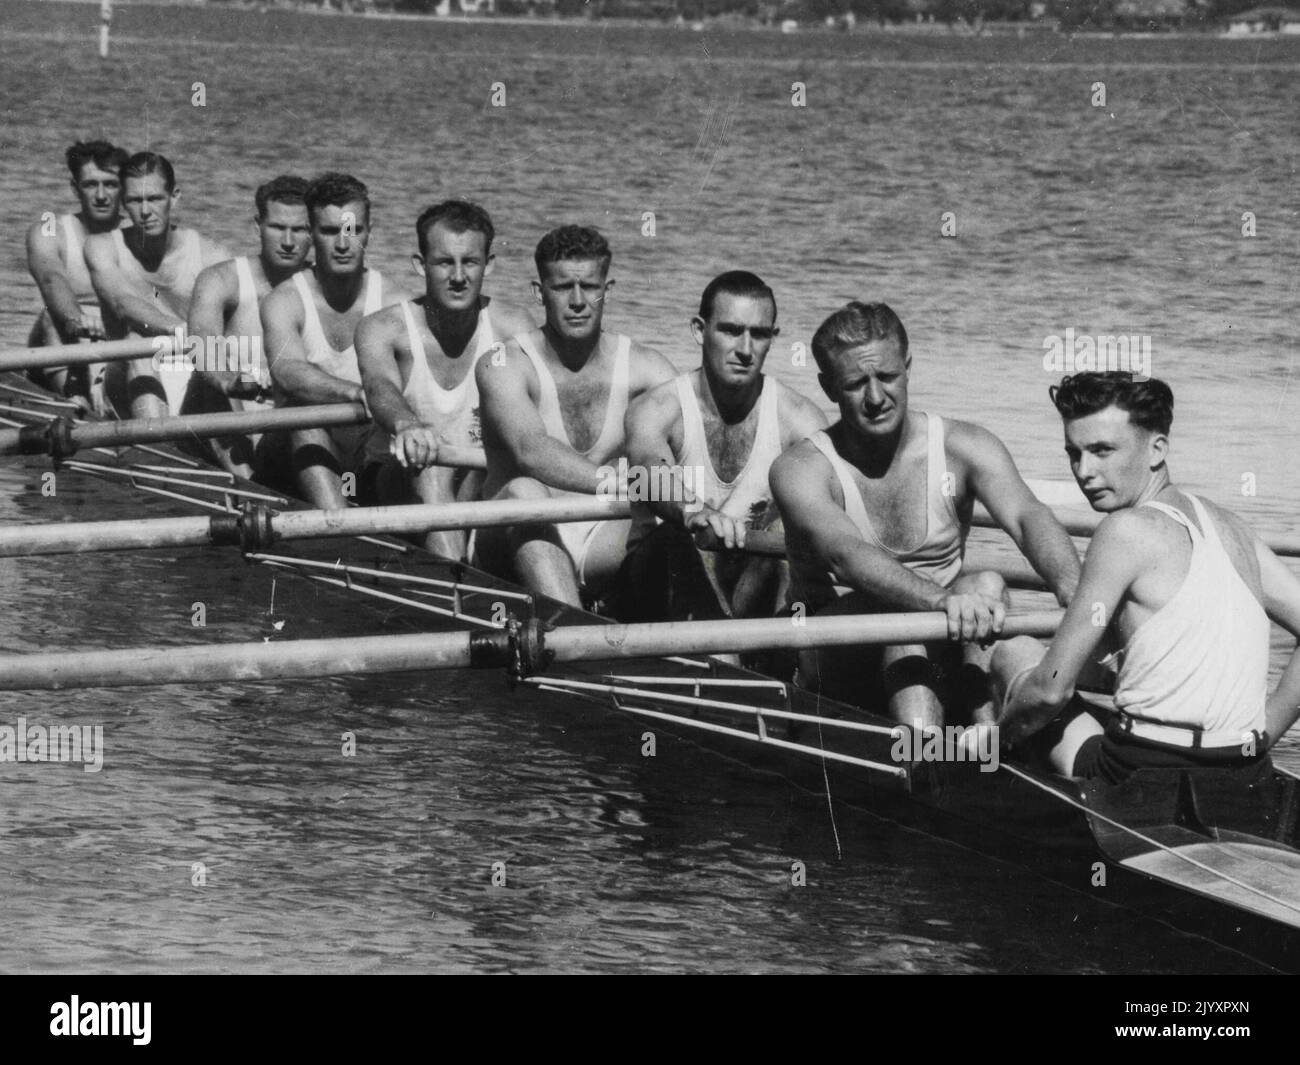 N.S.W. King's Cup Crew in Perth -- L. Robinson (Schlaganfall), O.A. Ruffels, P. Webb, B.H. Goswell, C.A. Cogle, G. Montgomerie, D. Bartley, A. Brown (Bow), E.B. Healy (cox). 21.Mai 1947. Stockfoto